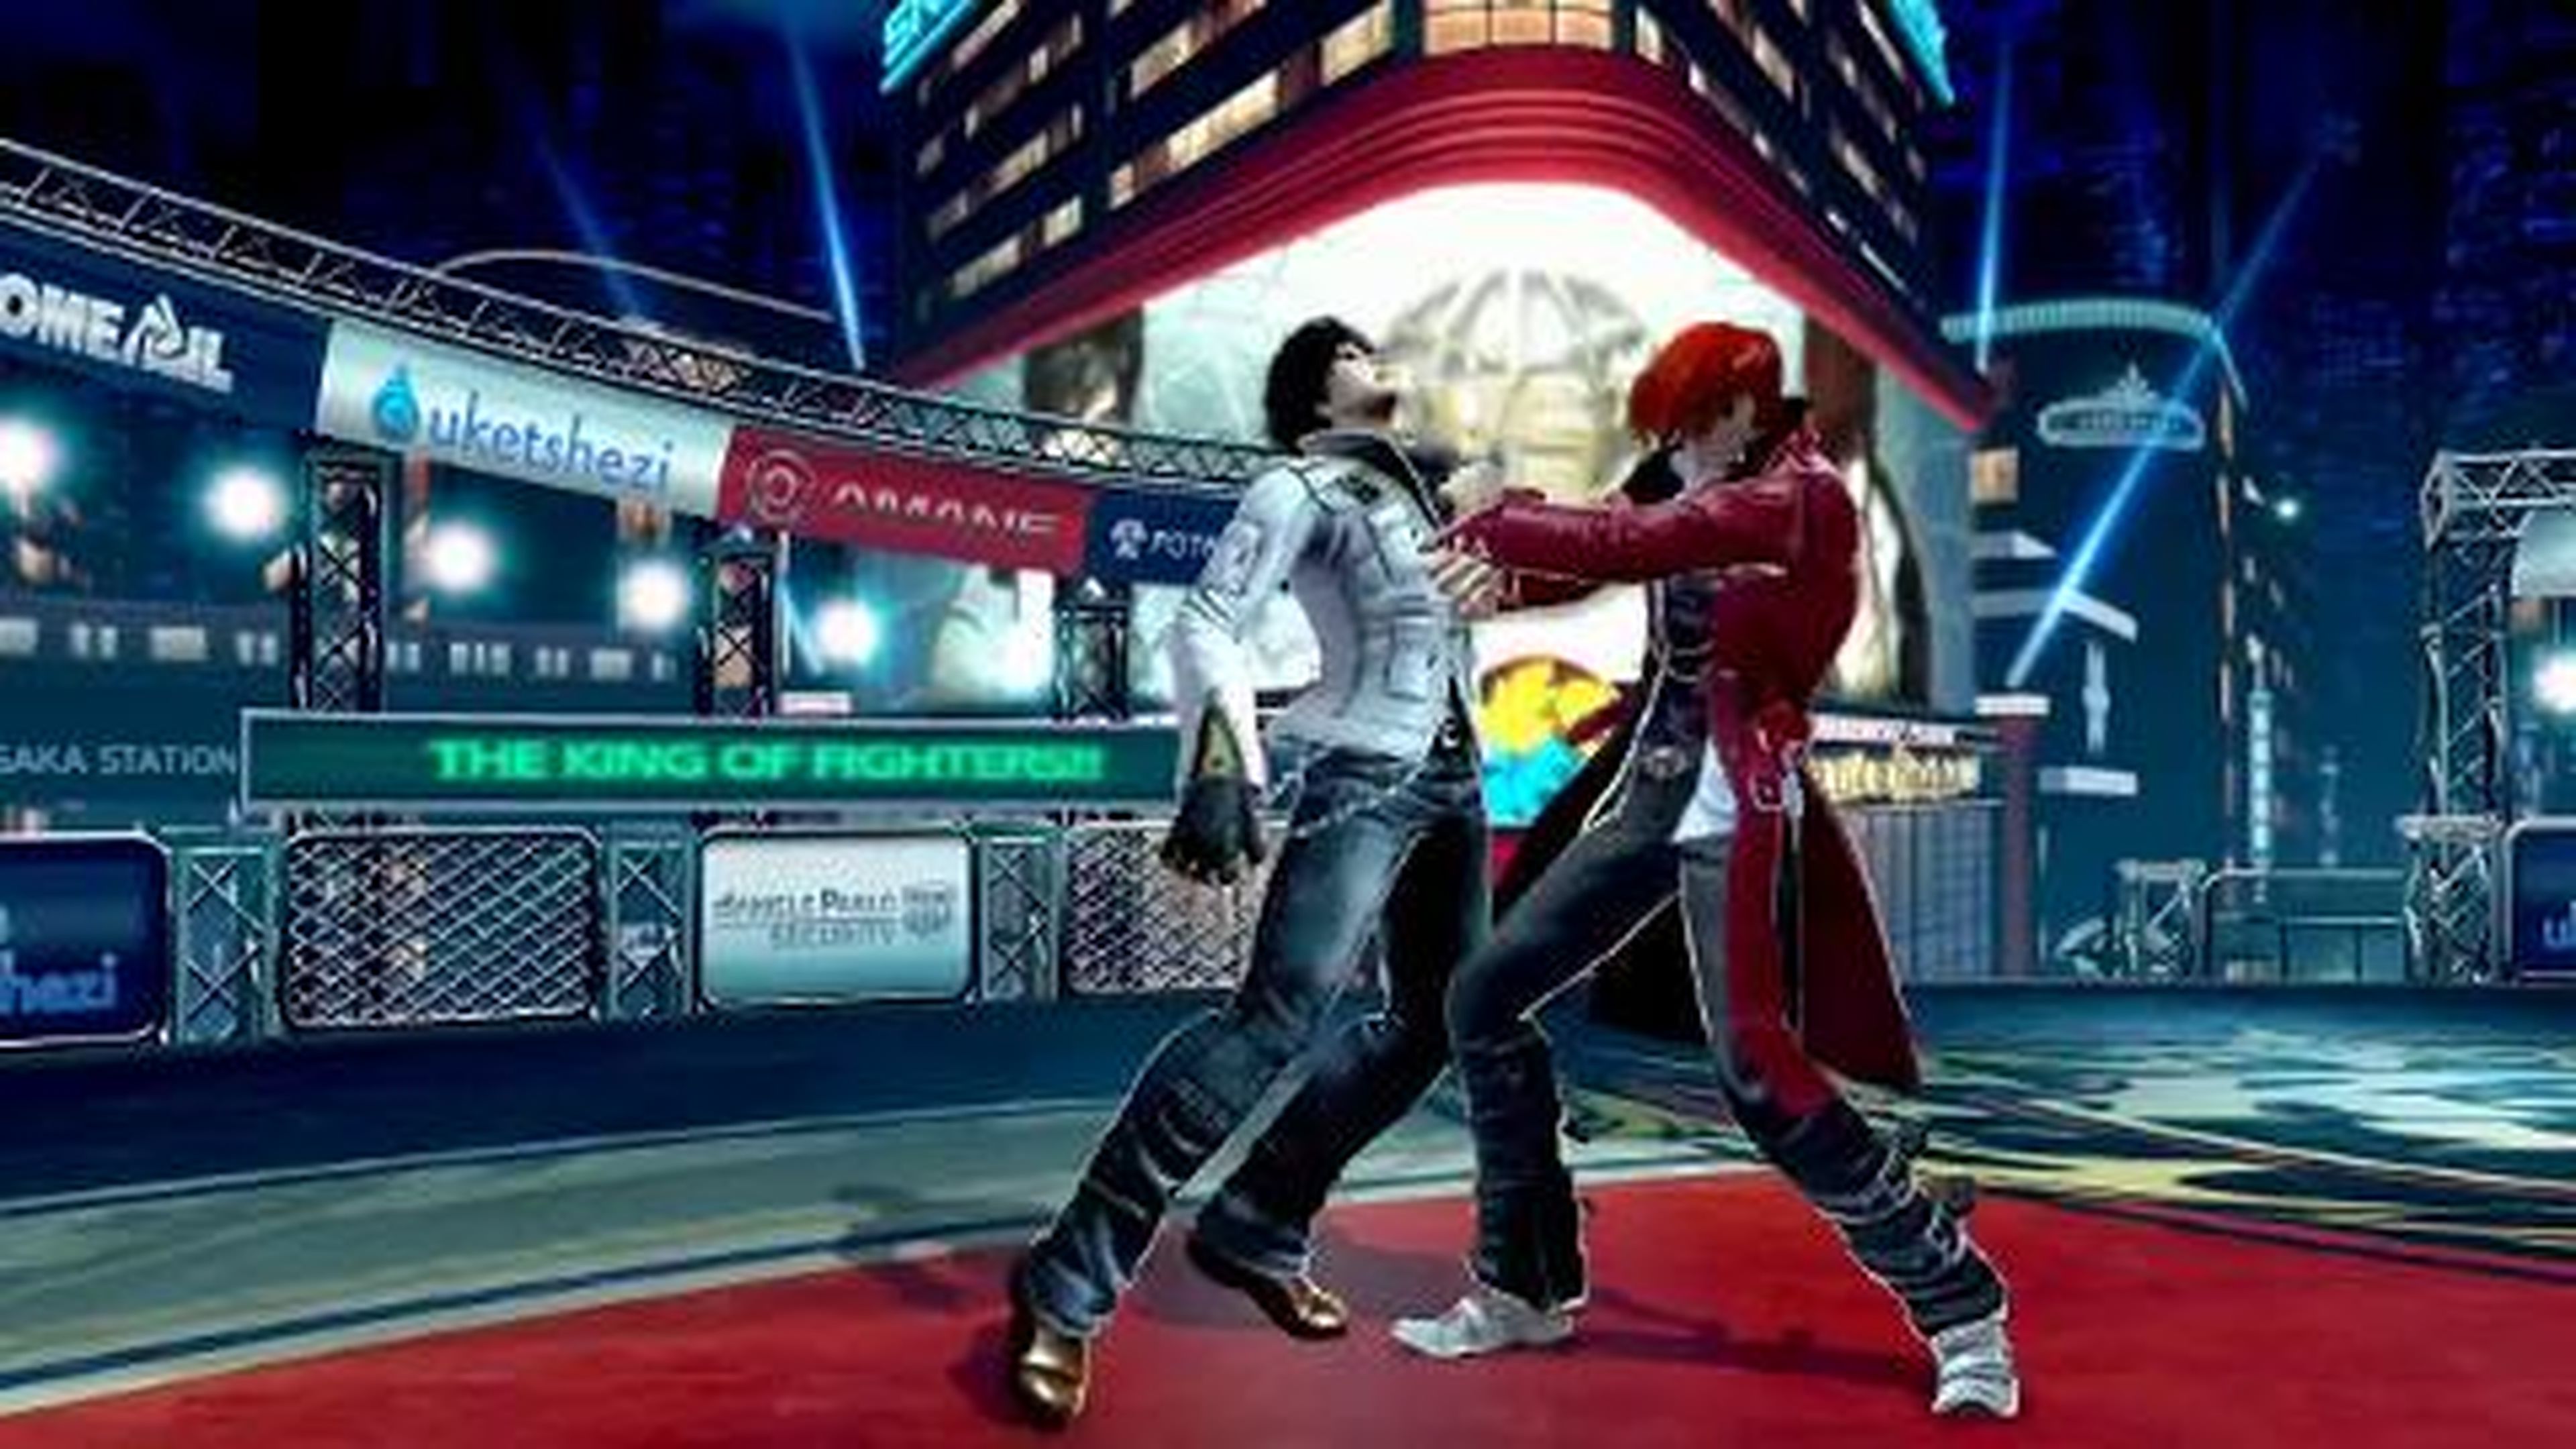 The King of Fighters XIV - Leona & Chang Koehan Reveal